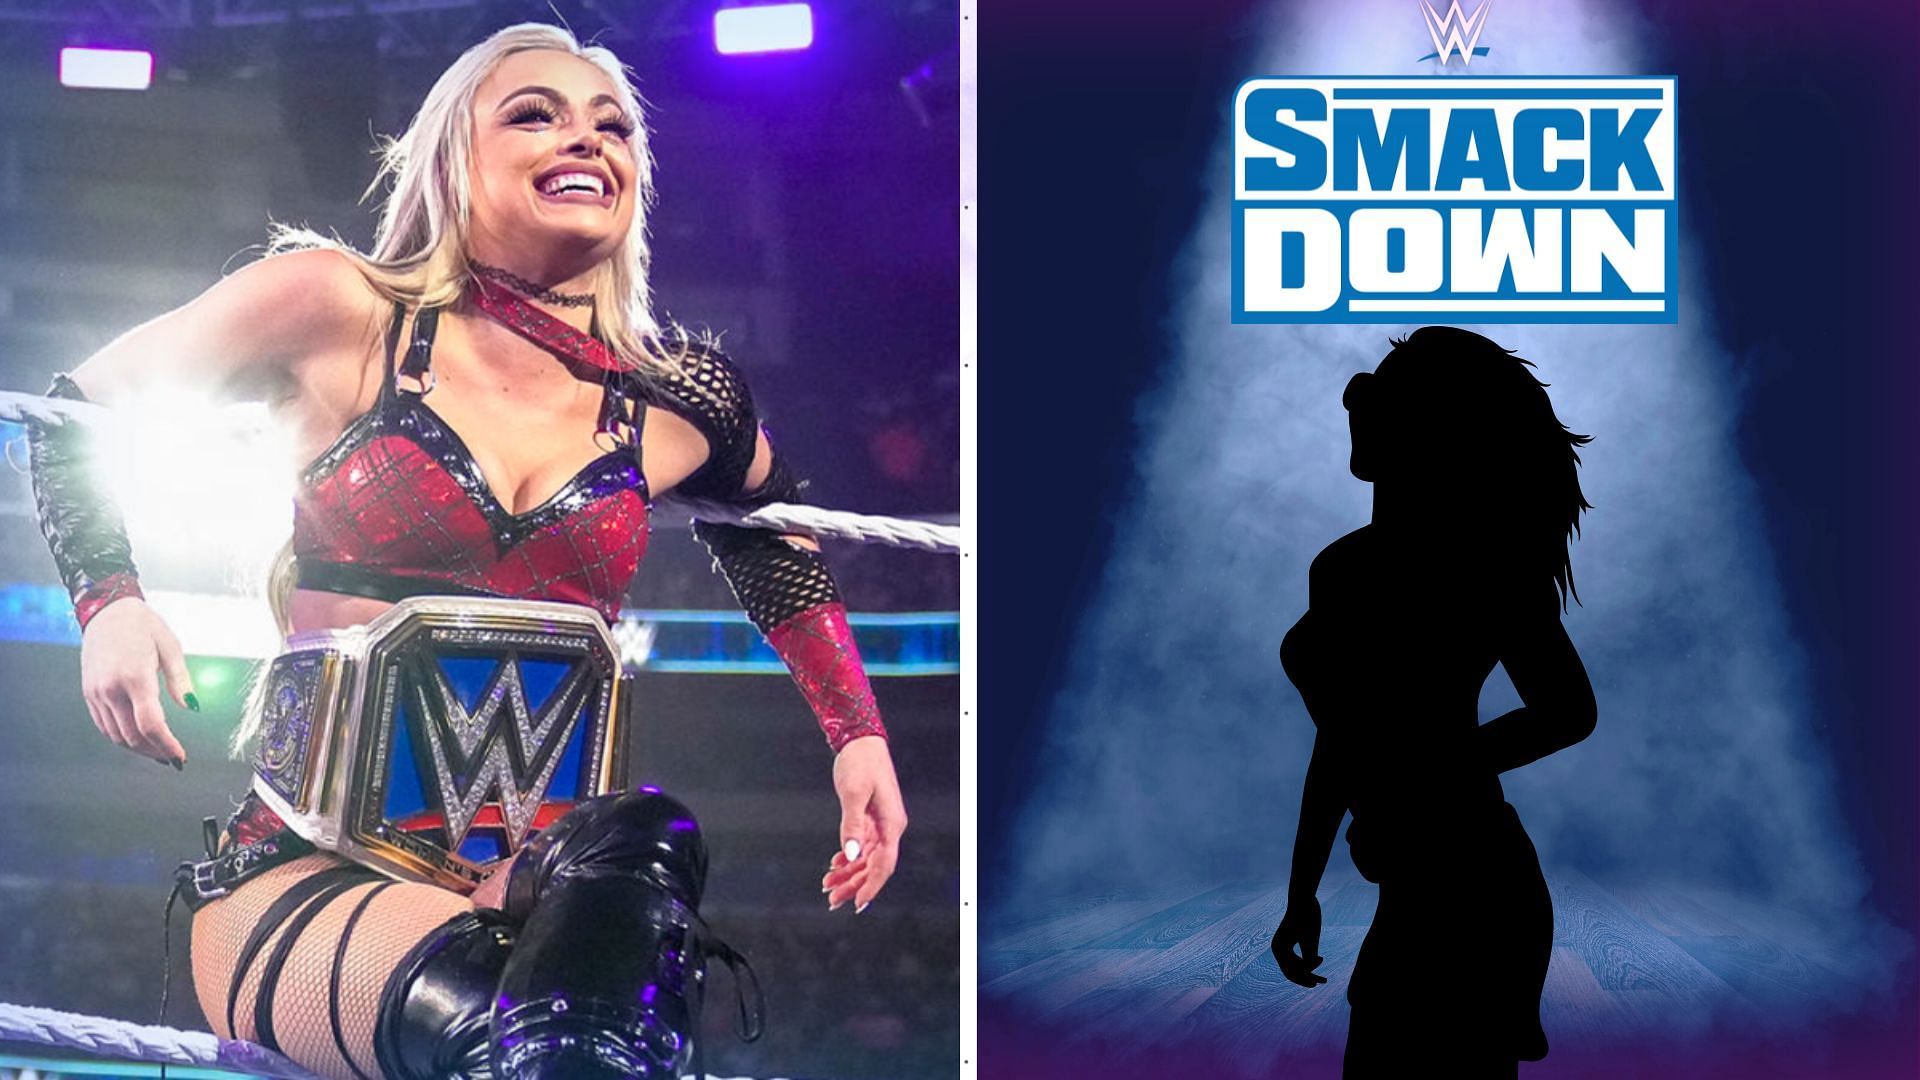 SmackDown Woman&#039;s Champion Liv Morgan agrees to wrestle fellow superstar on SmackDown